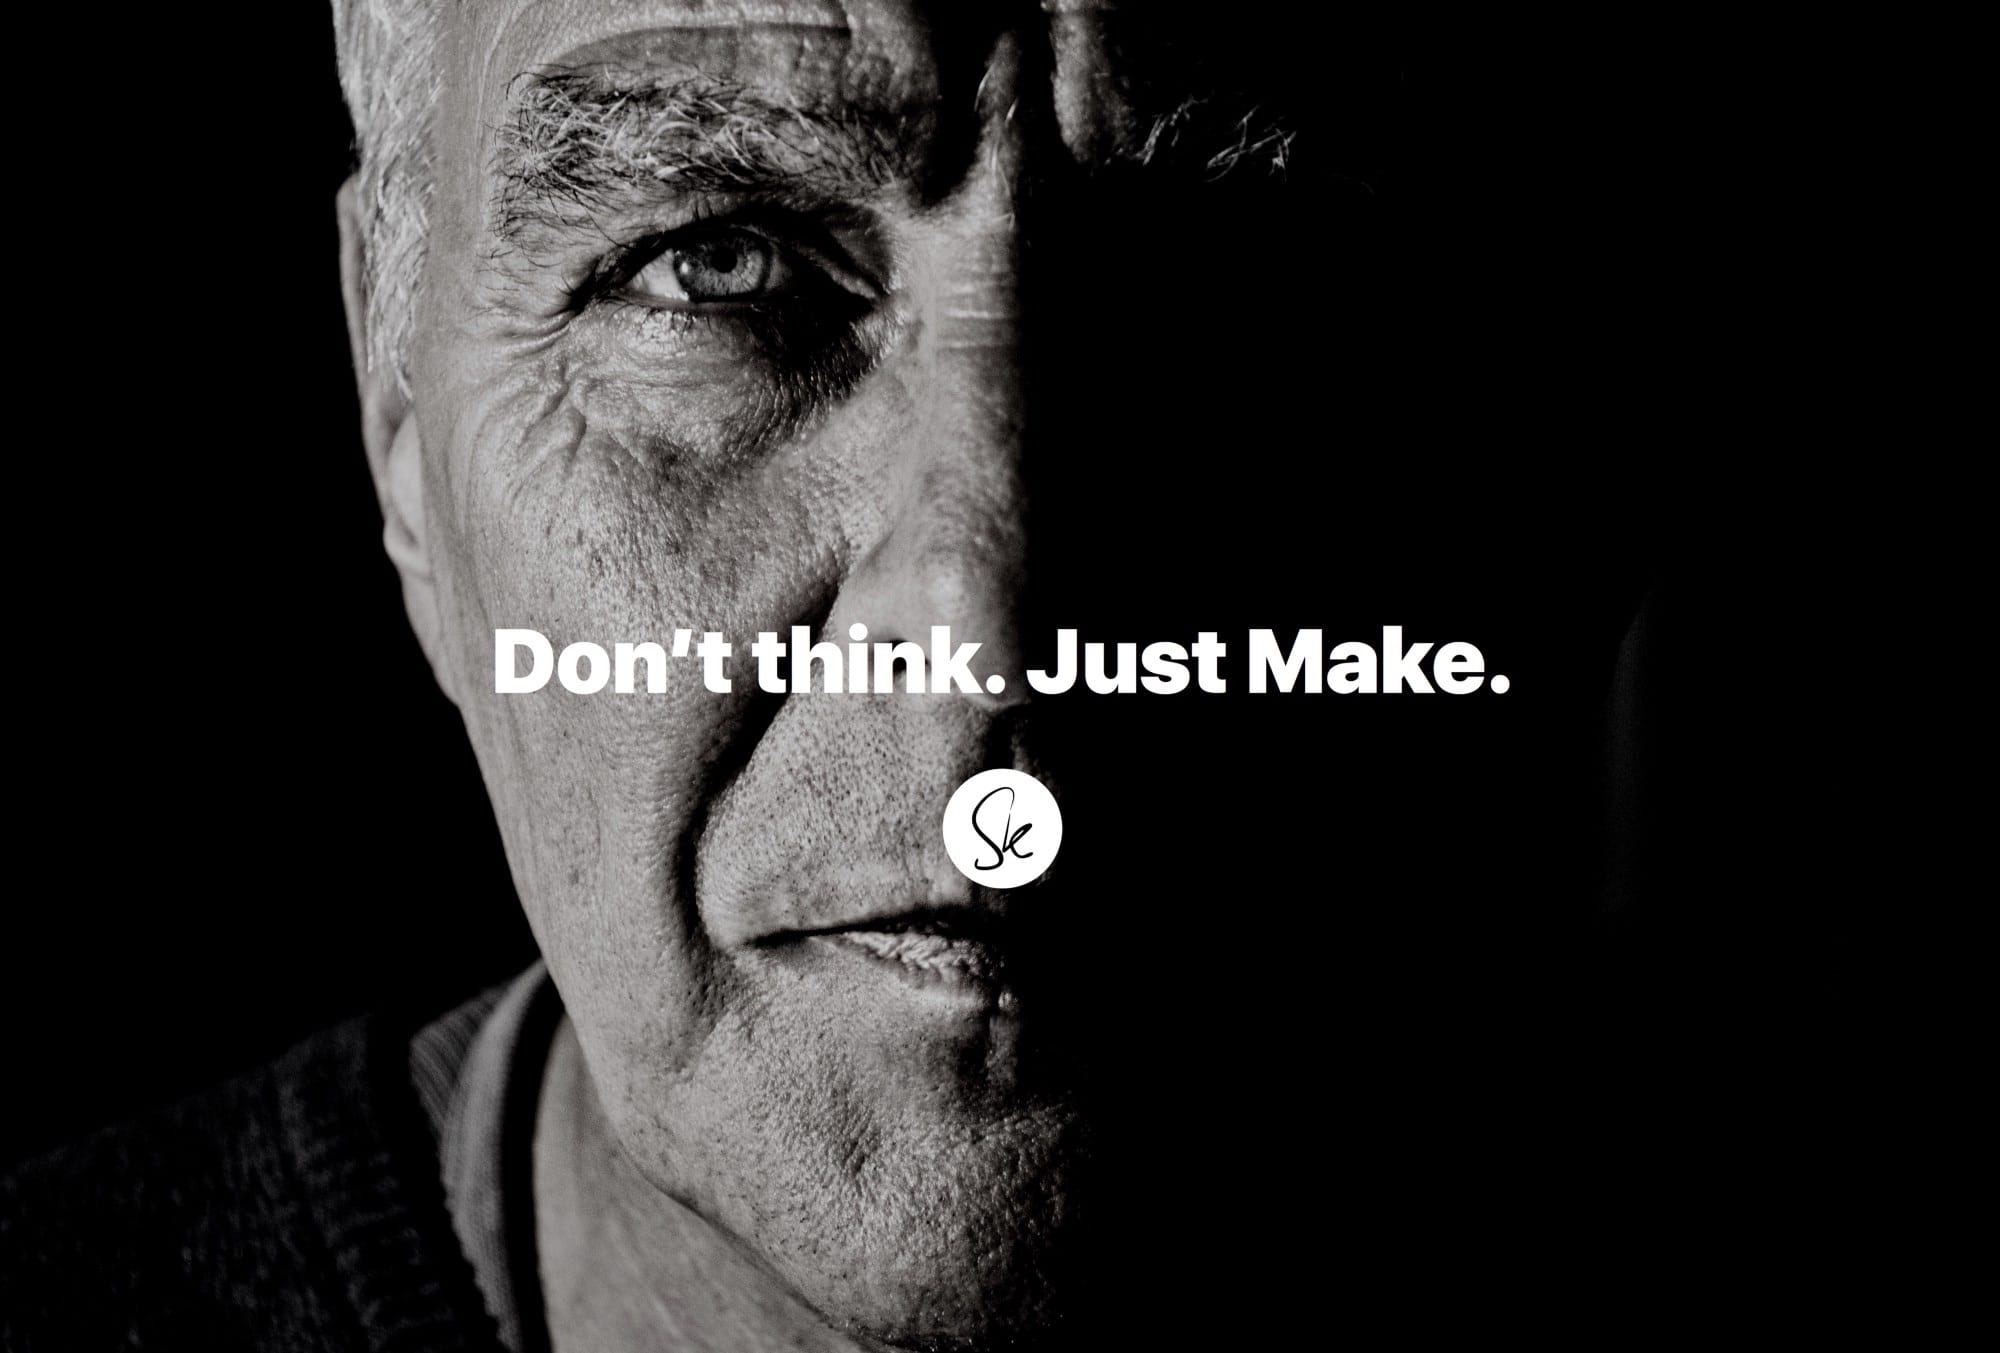 Don’t think. Just make.